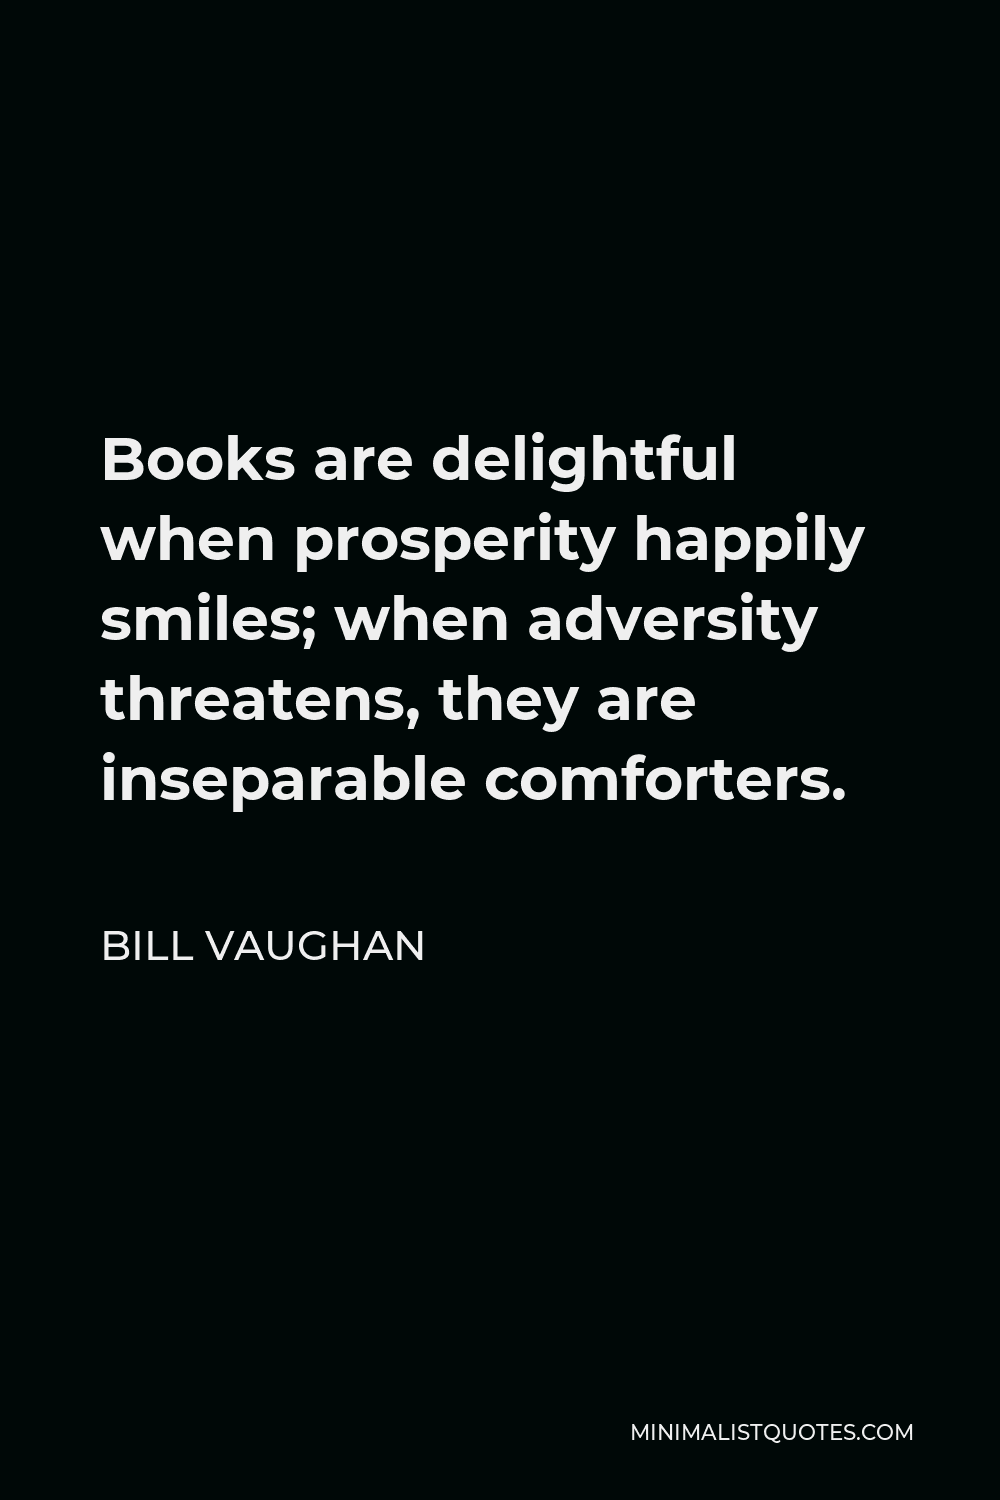 Bill Vaughan Quote - Books are delightful when prosperity happily smiles; when adversity threatens, they are inseparable comforters.